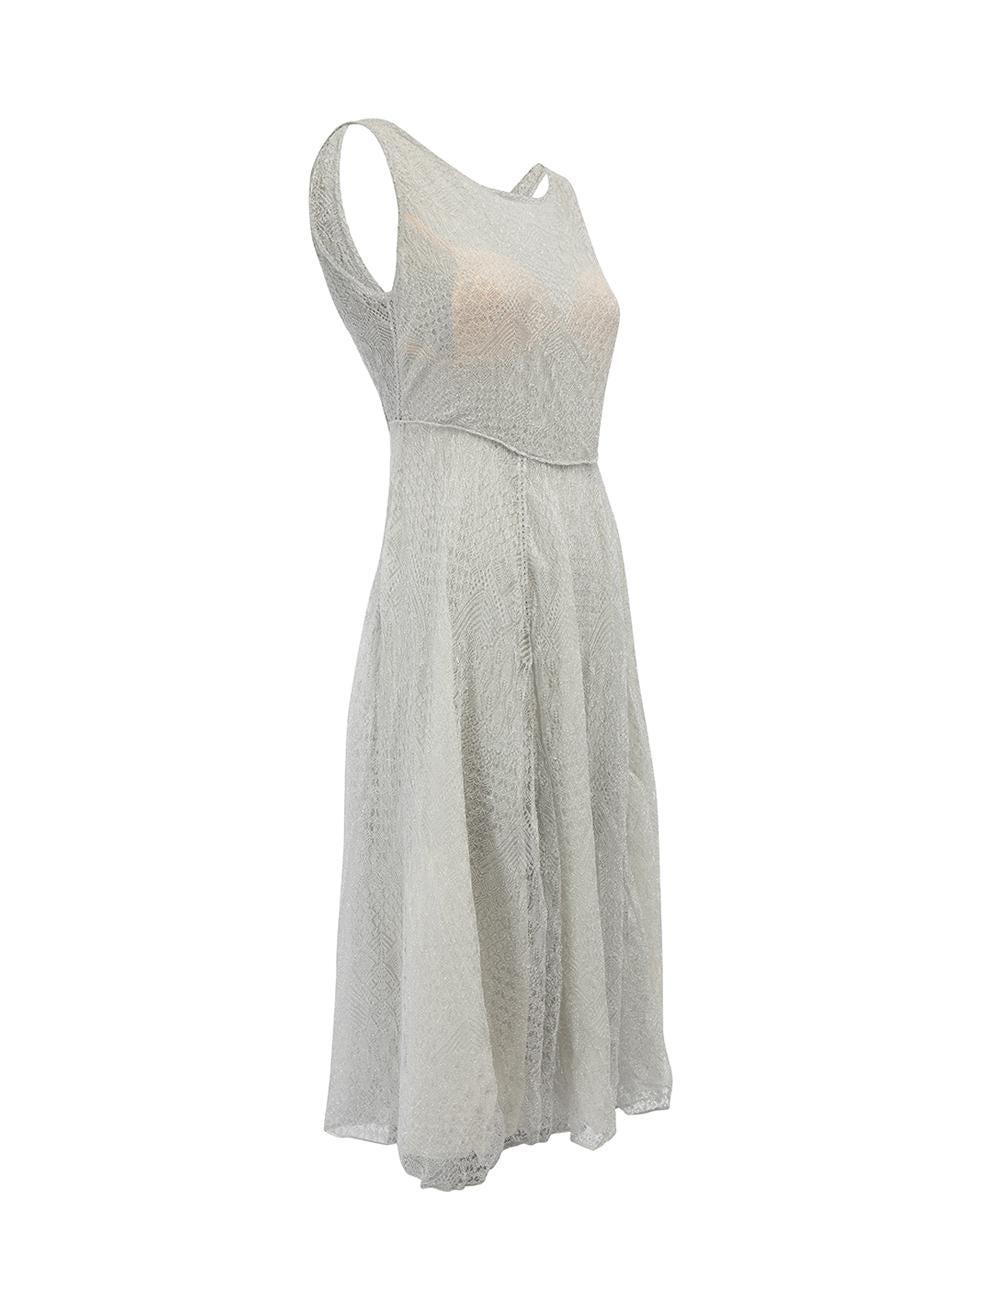 CONDITION is Very good. Minimal wear to dress is evident. Minimal wear to the cup inserts where marks can be seen on this used Missoni designer resale item. Details Metallic silver Viscose Knee length dress Abstract pattern Round neckline Open back